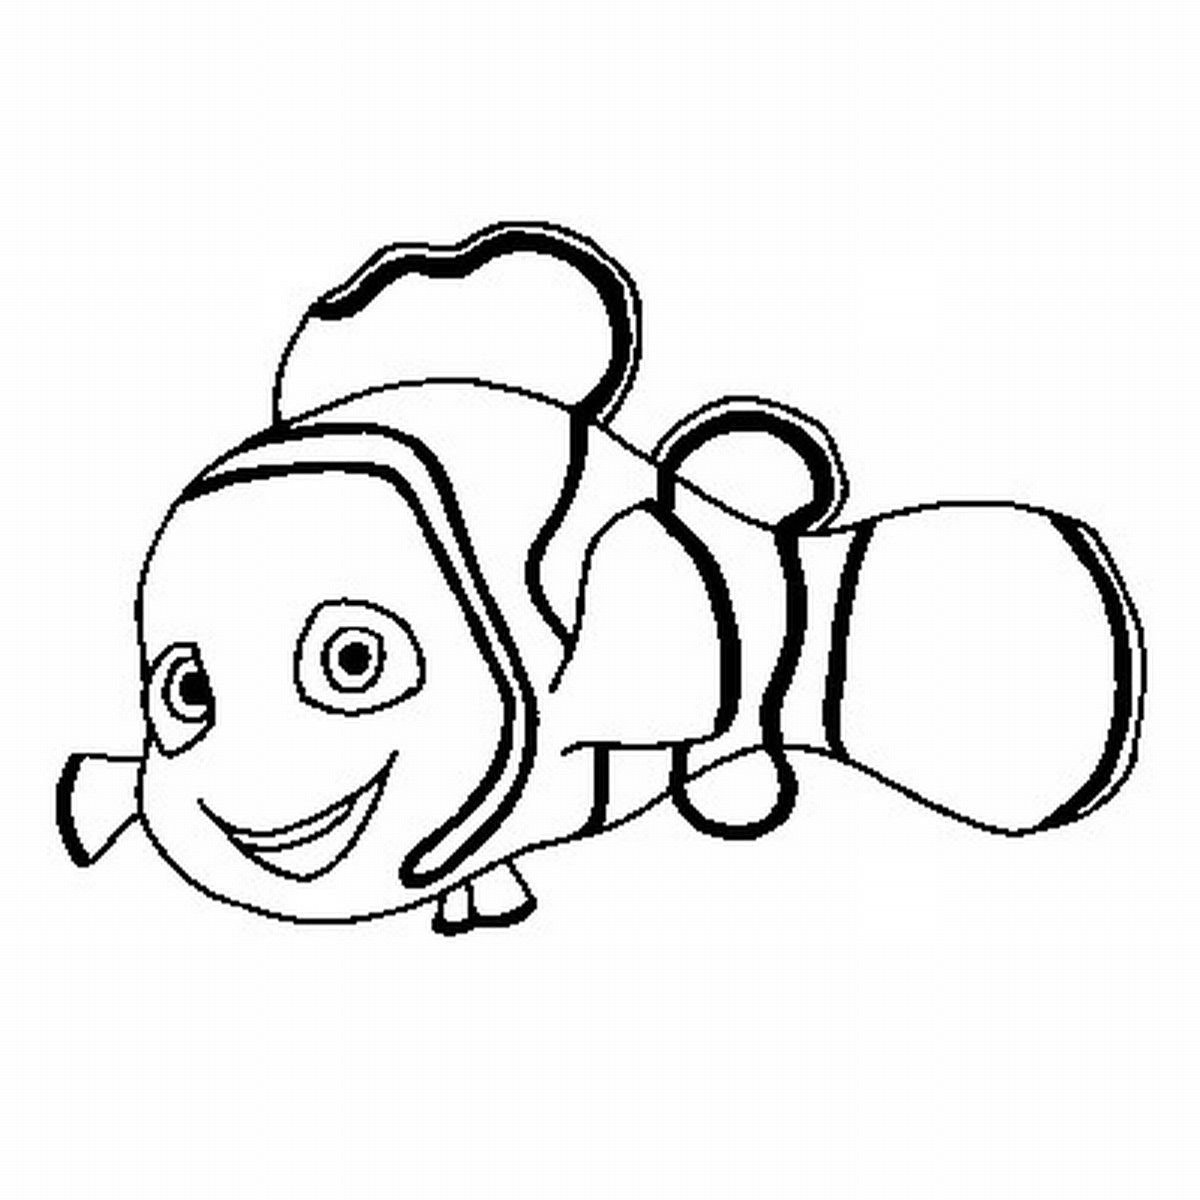 7 Pics of Nemo Fish Coloring Page - Dory Finding Nemo Coloring ...